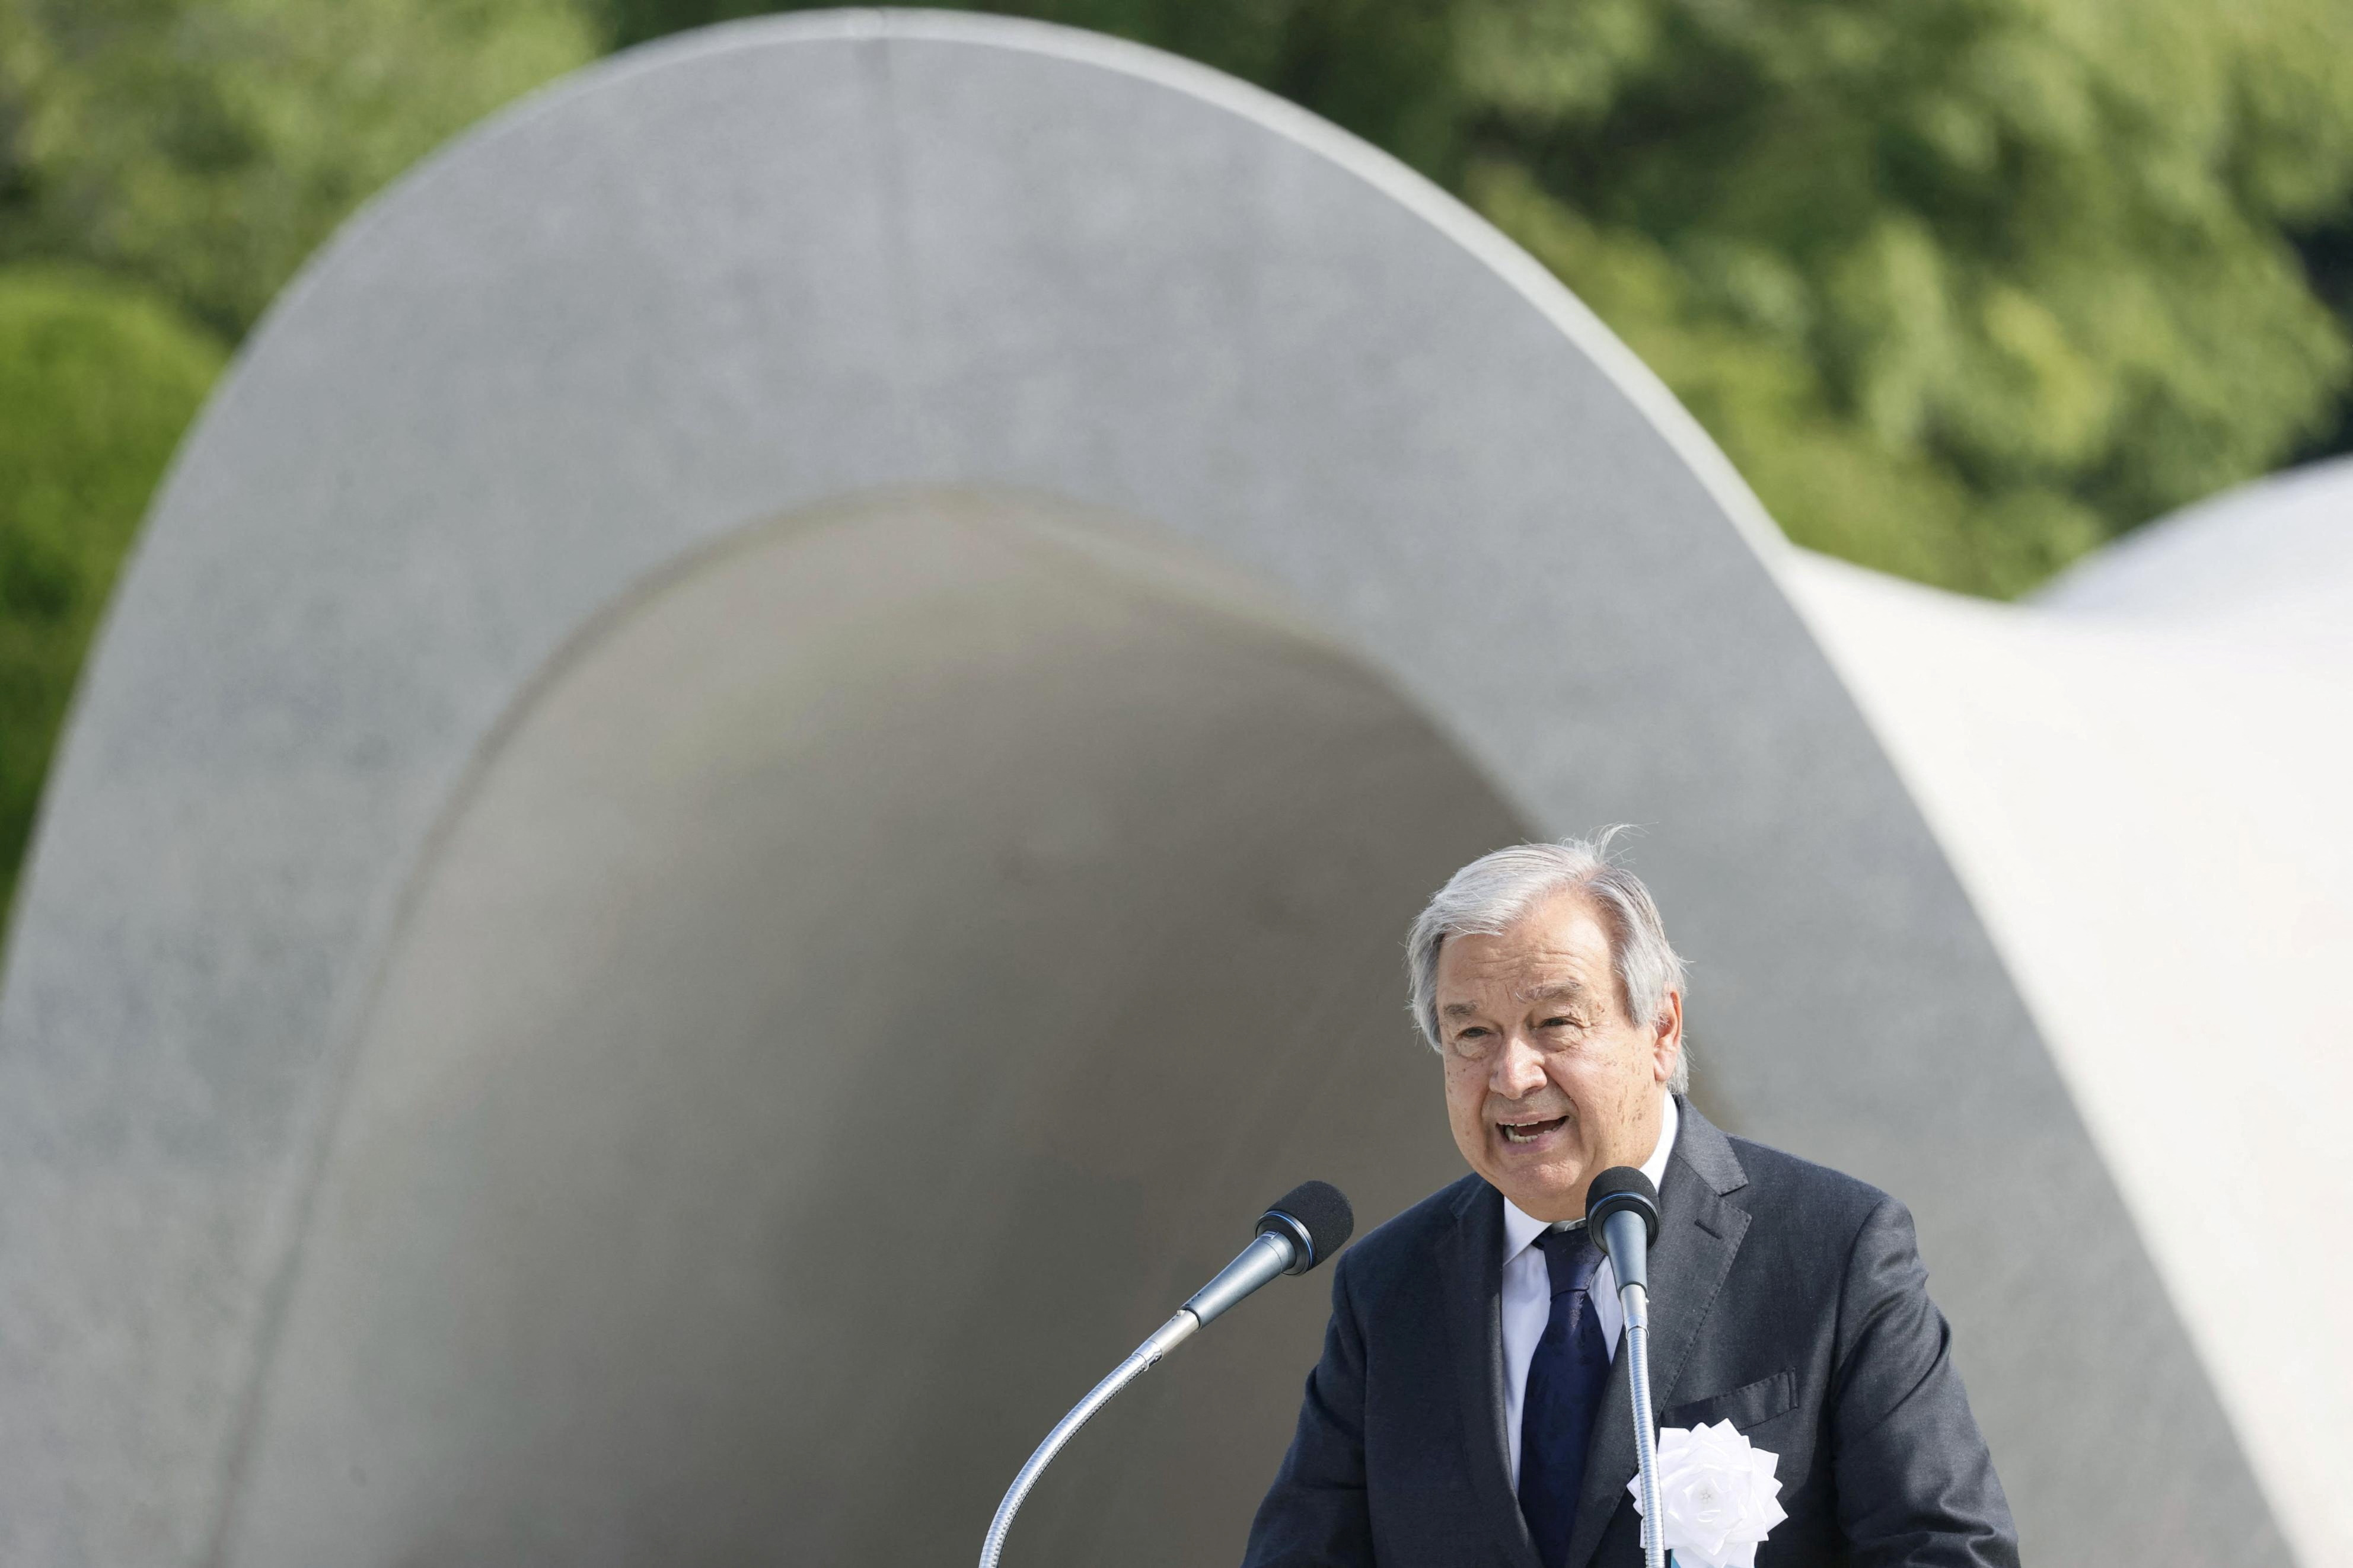 U.N. Secretary General Antonio Guterres delivers a speech during a ceremony to mark the 77th anniversary of the world's first atomic bombing in Hiroshima, Japan